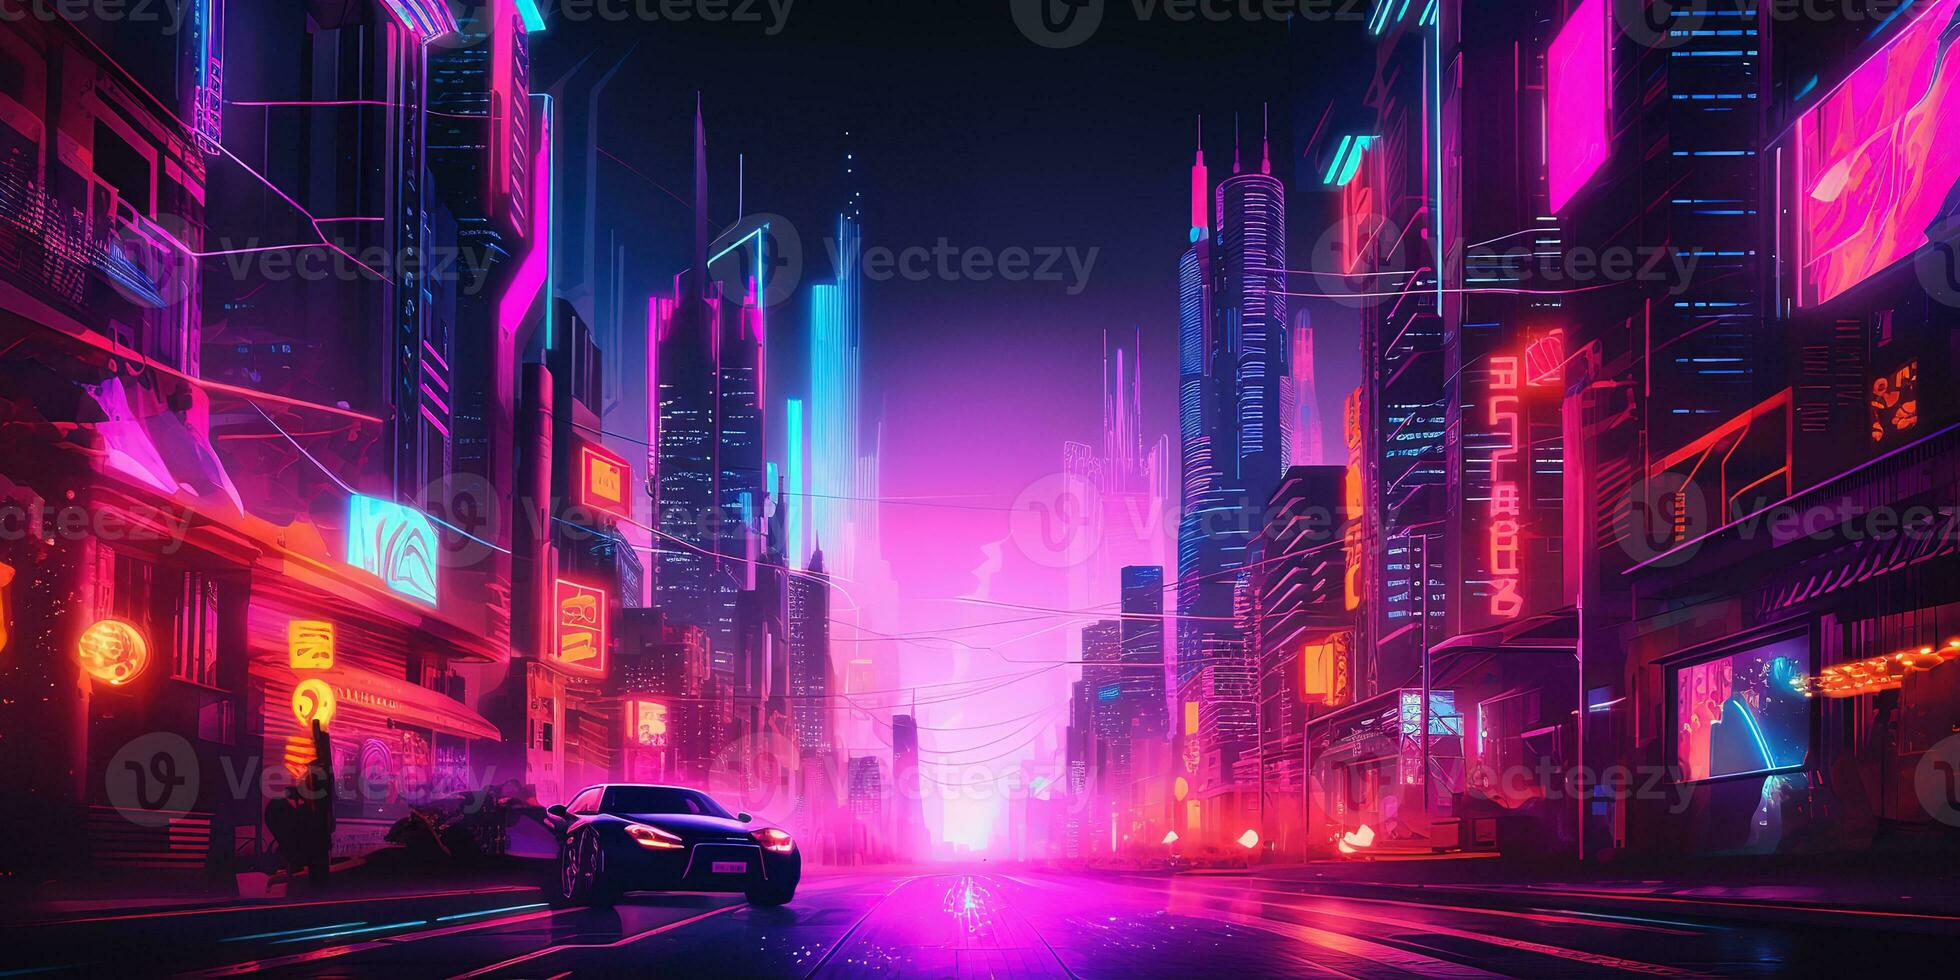 Aesthetic city synthwave wallpaper with a cool and vibrant neon design. - Cyberpunk